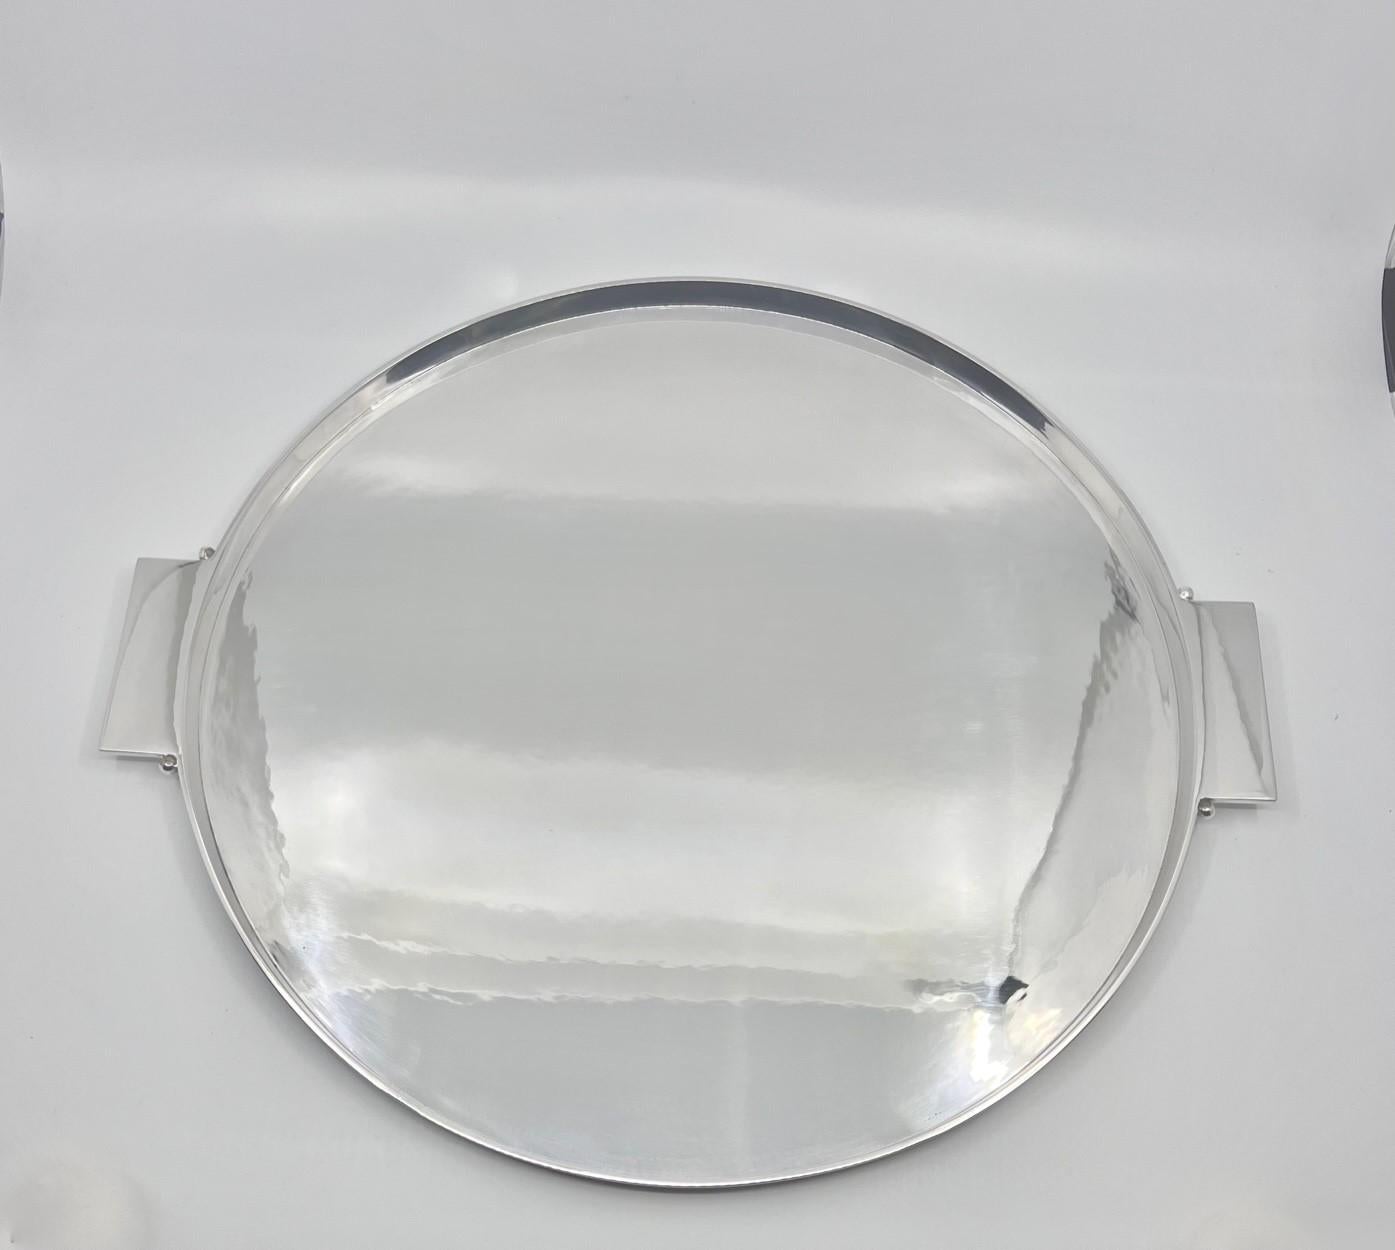 A large and heavy Georg Jensen art deco sterling silver tray #529, designed by Johan Rohde in 1928. A circular edged tray with square handles each having a single bead as design. The large tray is ideal for a tea or coffee set or as a drinks tray.